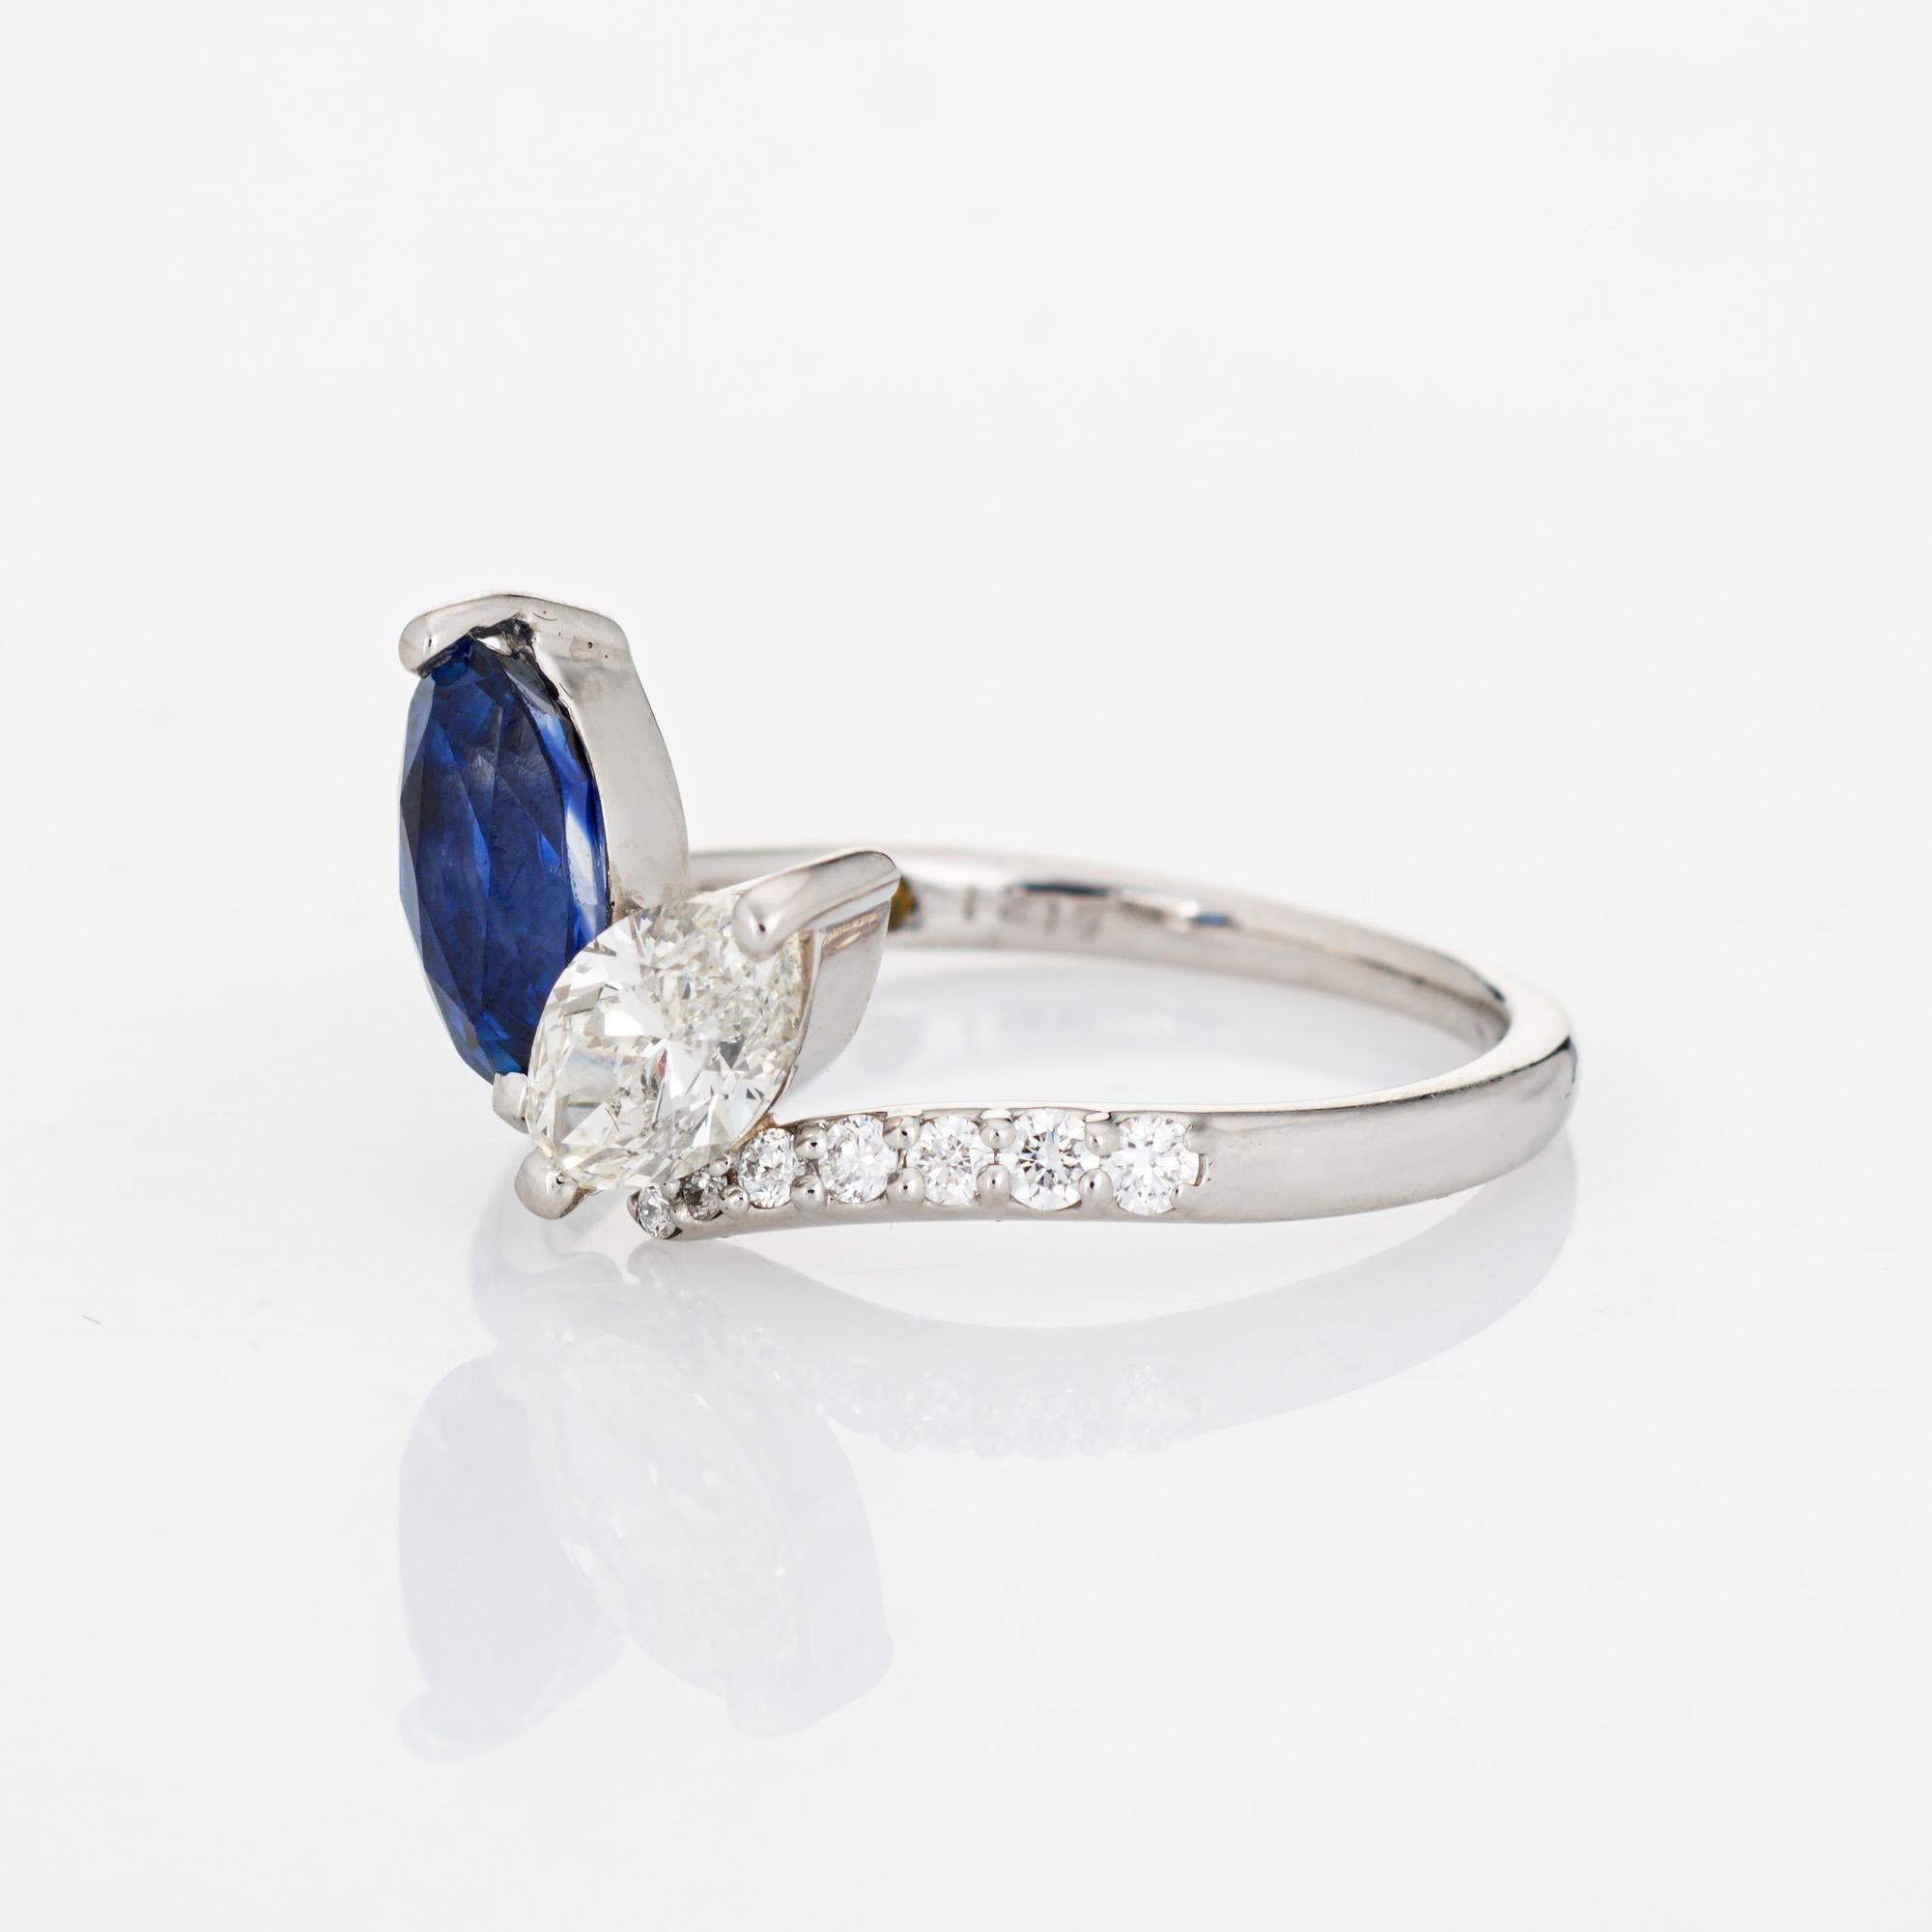 Marquise Cut Sapphire Diamond Ring Moi et Toi Platinum Sz 6 Marquise Engagement Jewelry For Sale